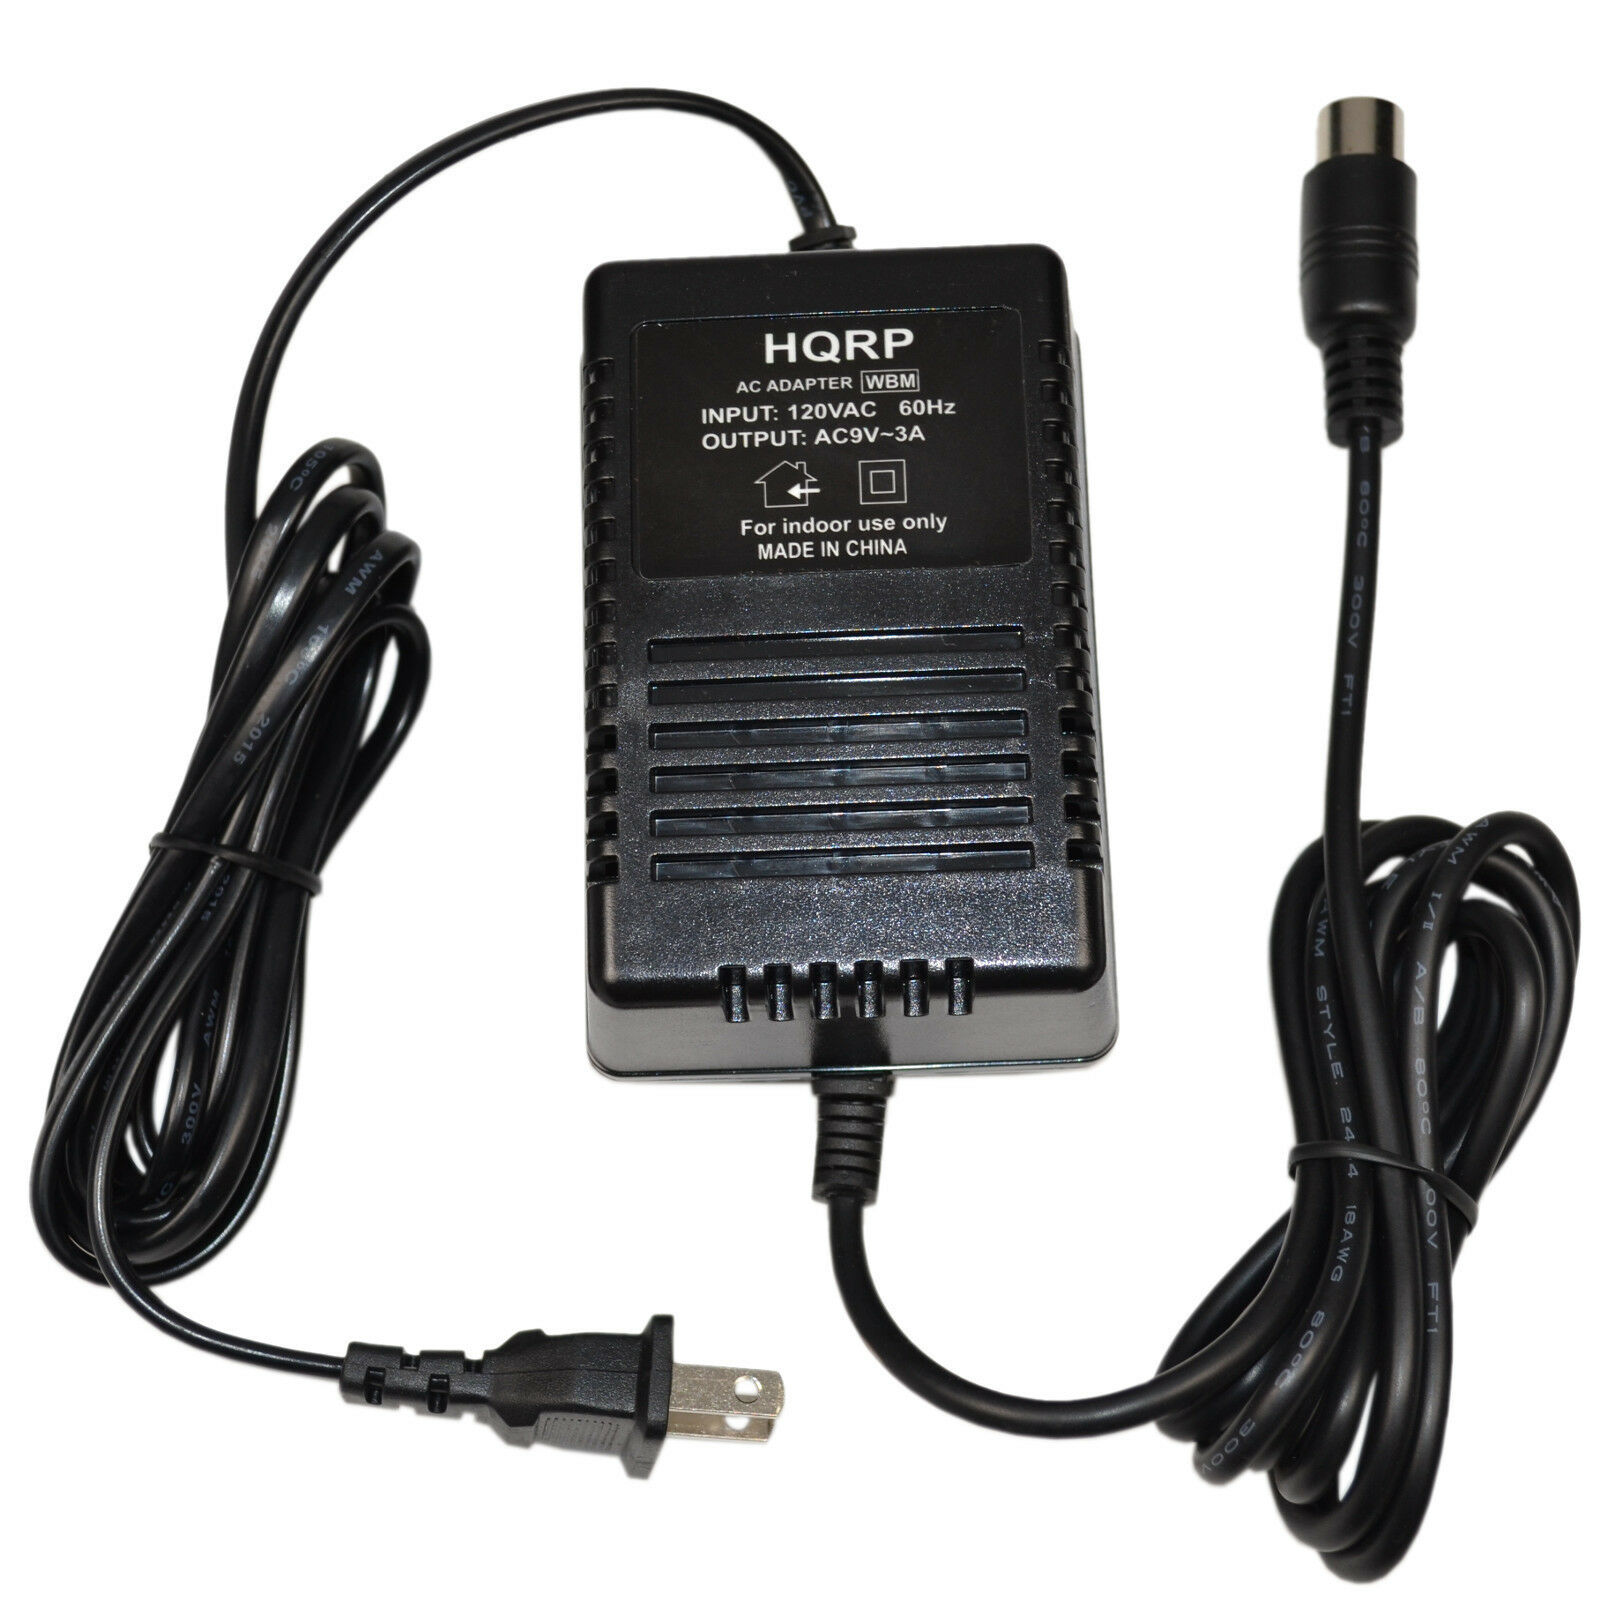 Power Supply AC Adapter for Korg Electribe MX EMX-1, Triton Rack Output Current: 3 A Connector: DIN 4 pin UPC: 8808